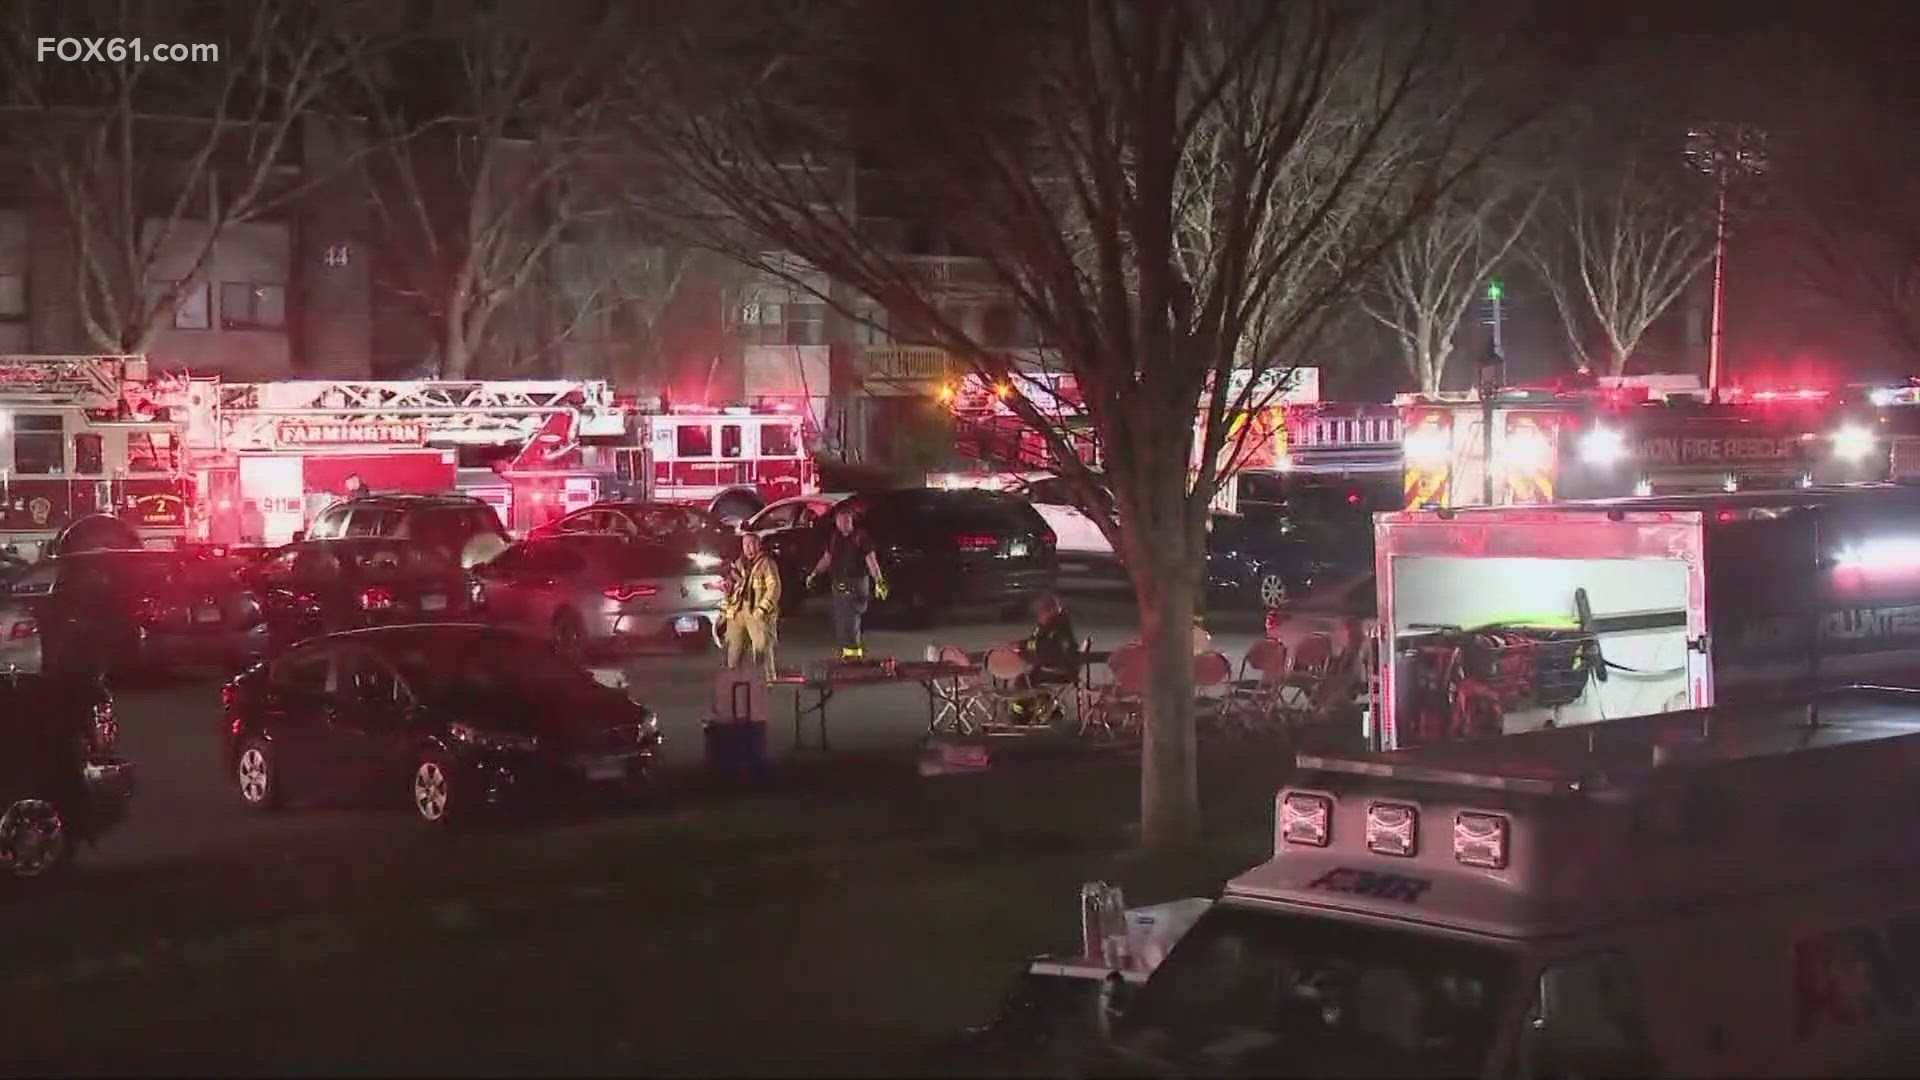 Firefighters are investigating a fire at an apartment complex in Avon on Sunday evening.